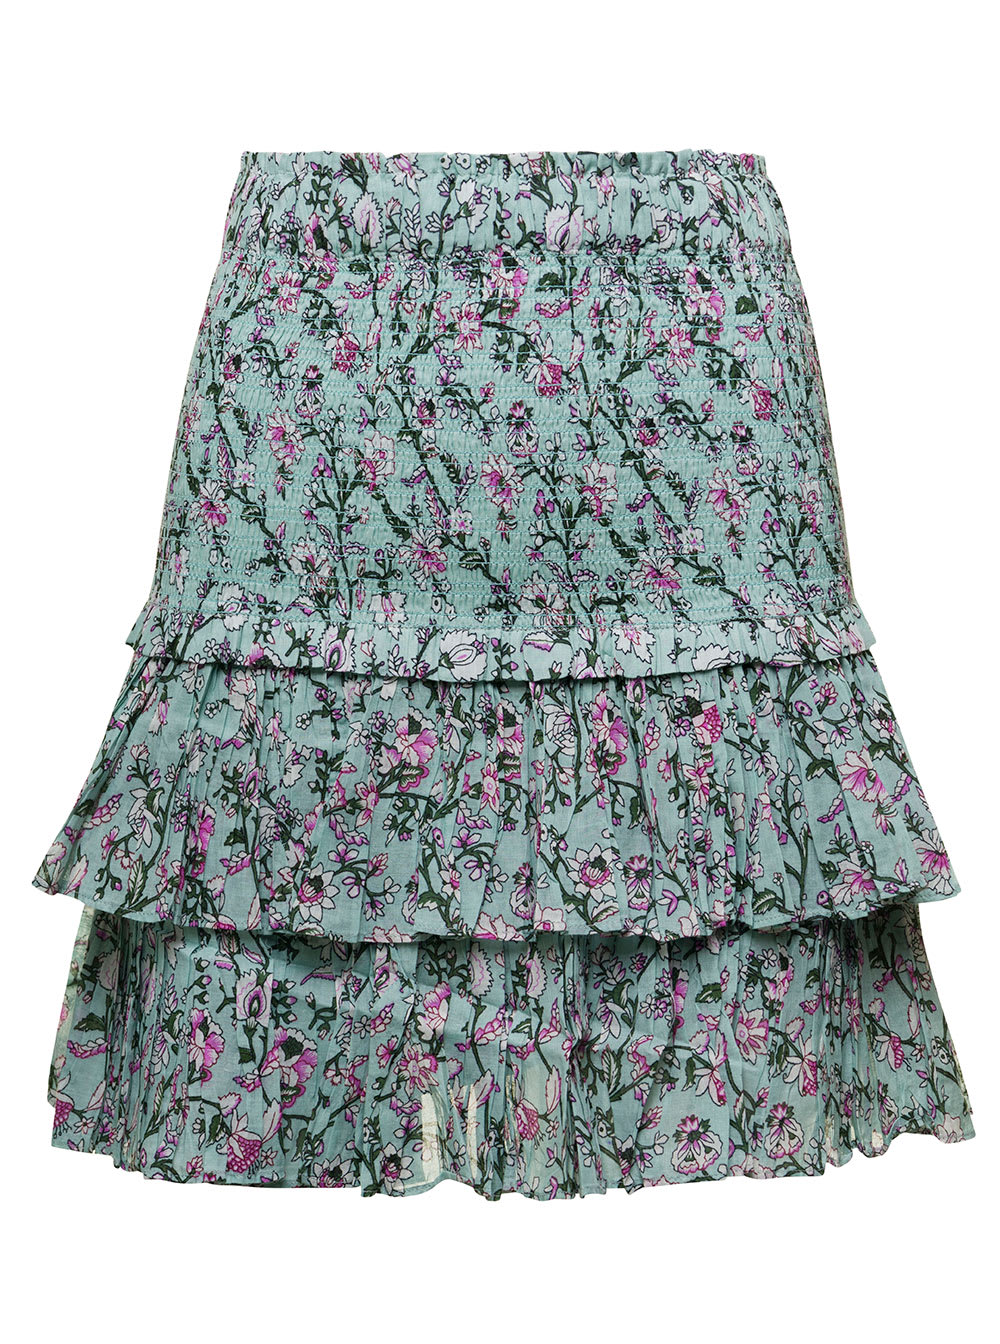 ISABEL MARANT ÉTOILE LIGHT BLUE FLORAL PRINT TIERED SKIRT IN COTTON WOMAN